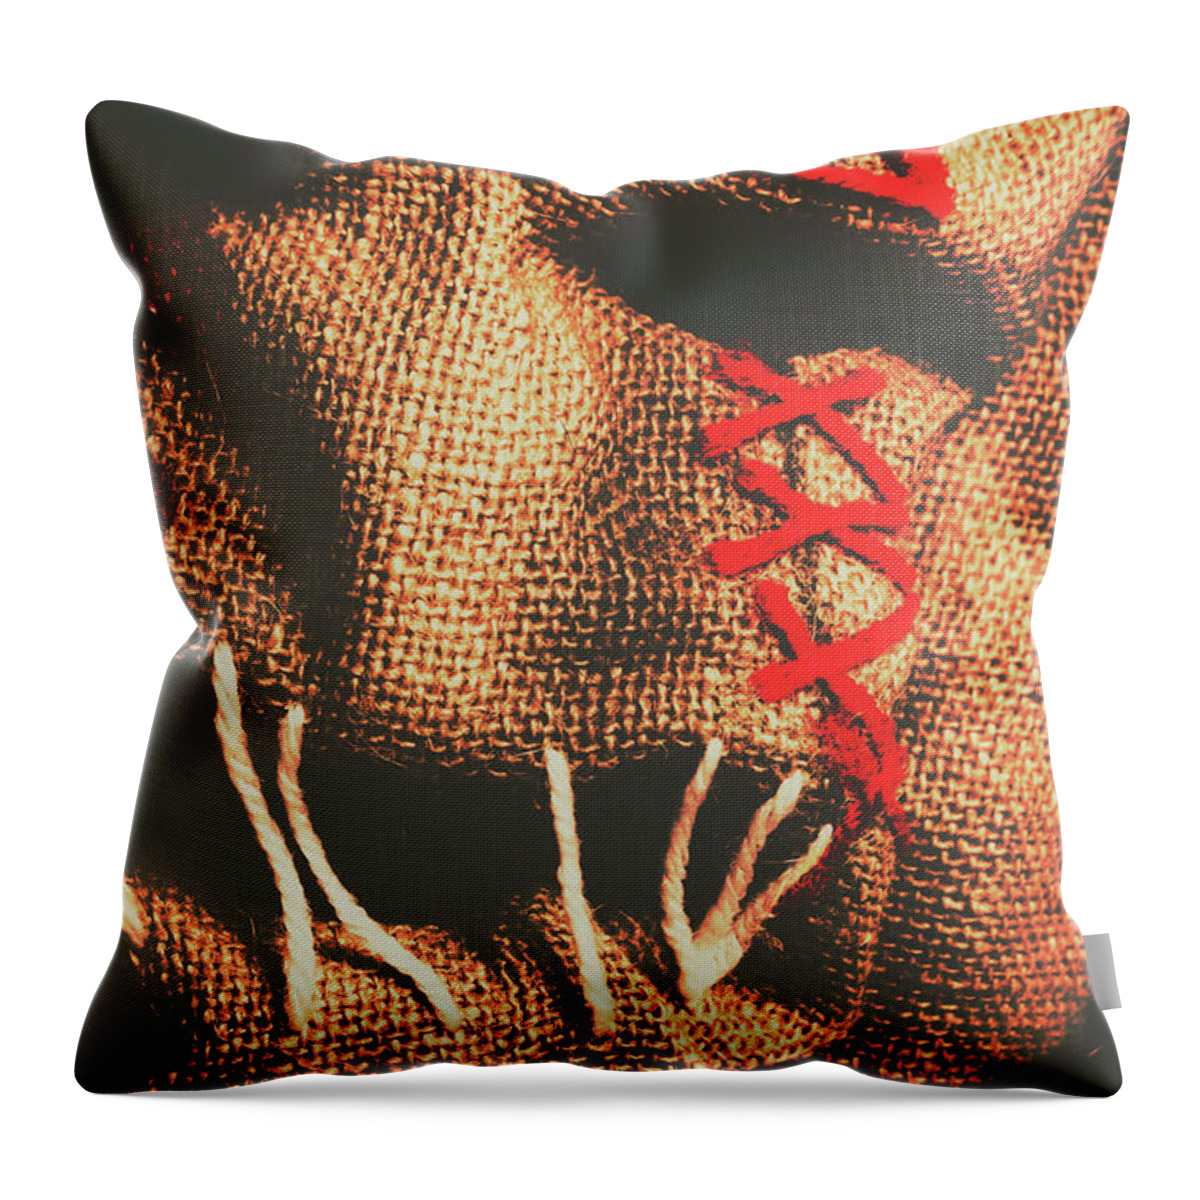 Evil Throw Pillow featuring the photograph Stitched up madness by Jorgo Photography